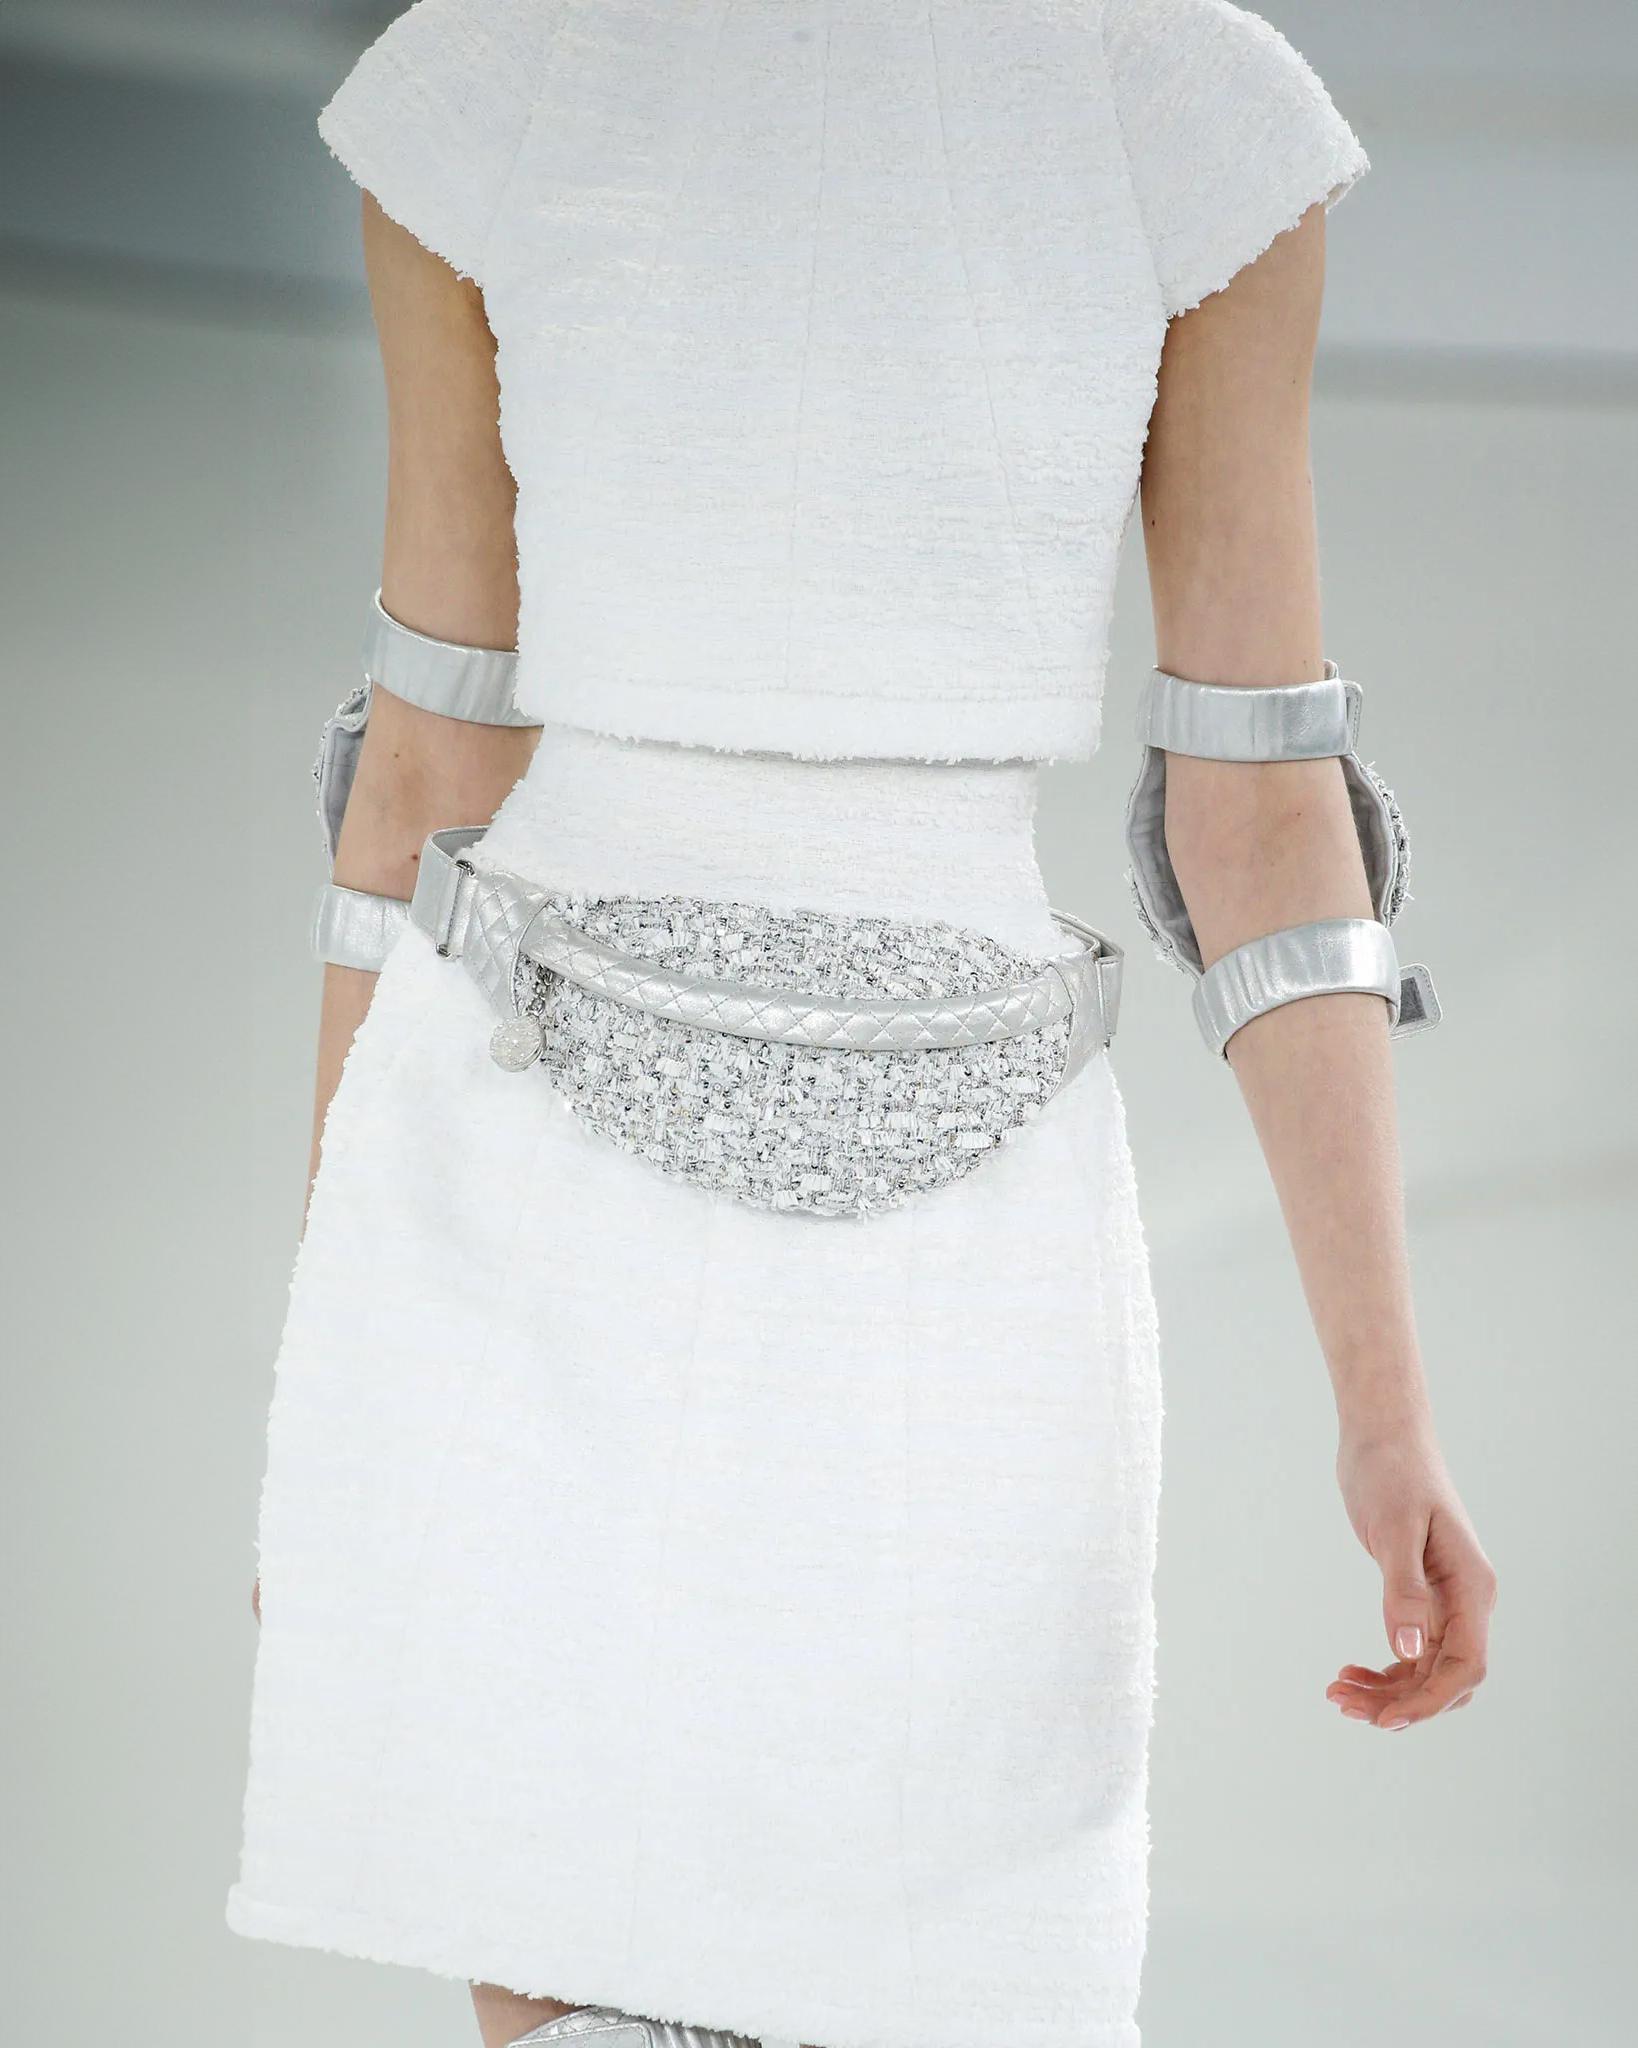 Chanel by Karl Lagerfeld Haute Couture White Bouclé Corseted Skirt Suit, ss 2014 For Sale 11